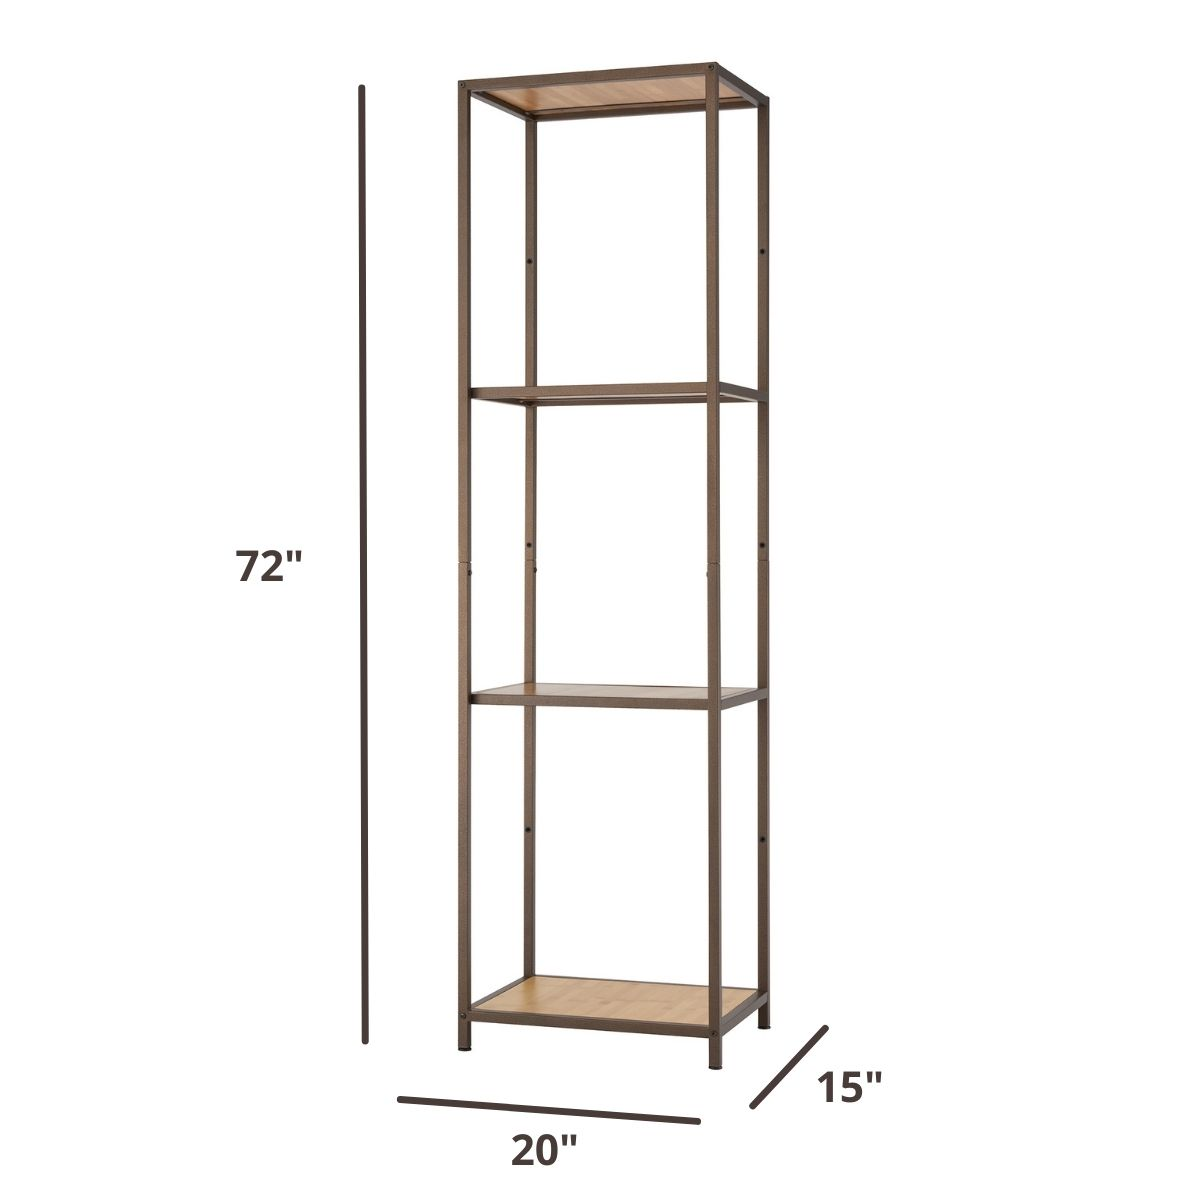 bronze shelving tower dimensions: 72 inches tall by 20 inches wide by 15 inches deep